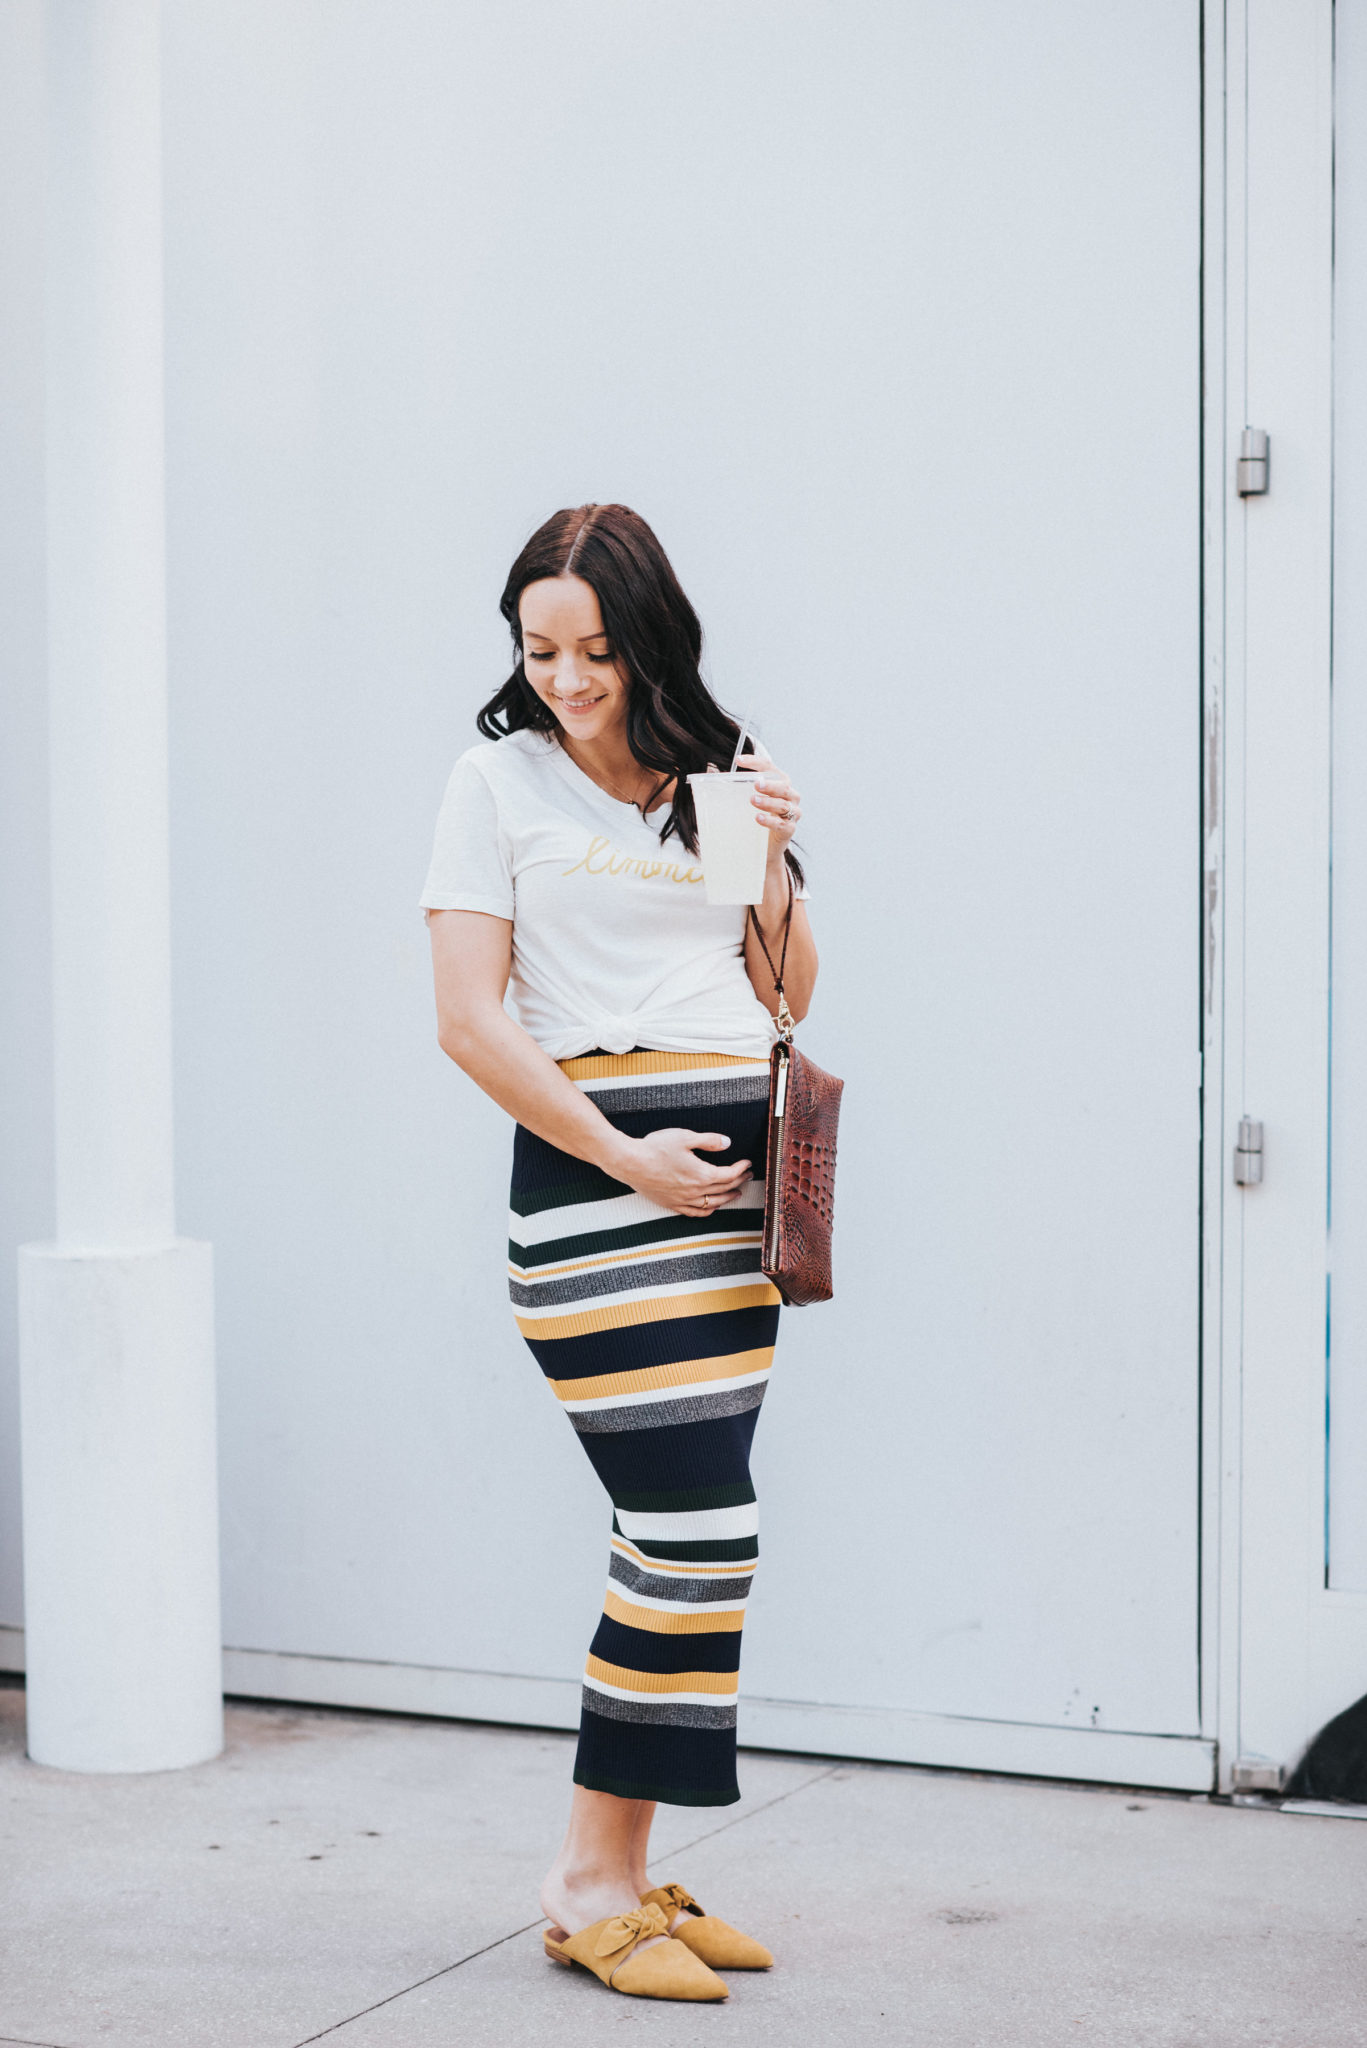 Spring Maternity Fashion with Non Maternity Pieces by popular Las Vegas fashion blogger and expecting mom Outfits & Outings